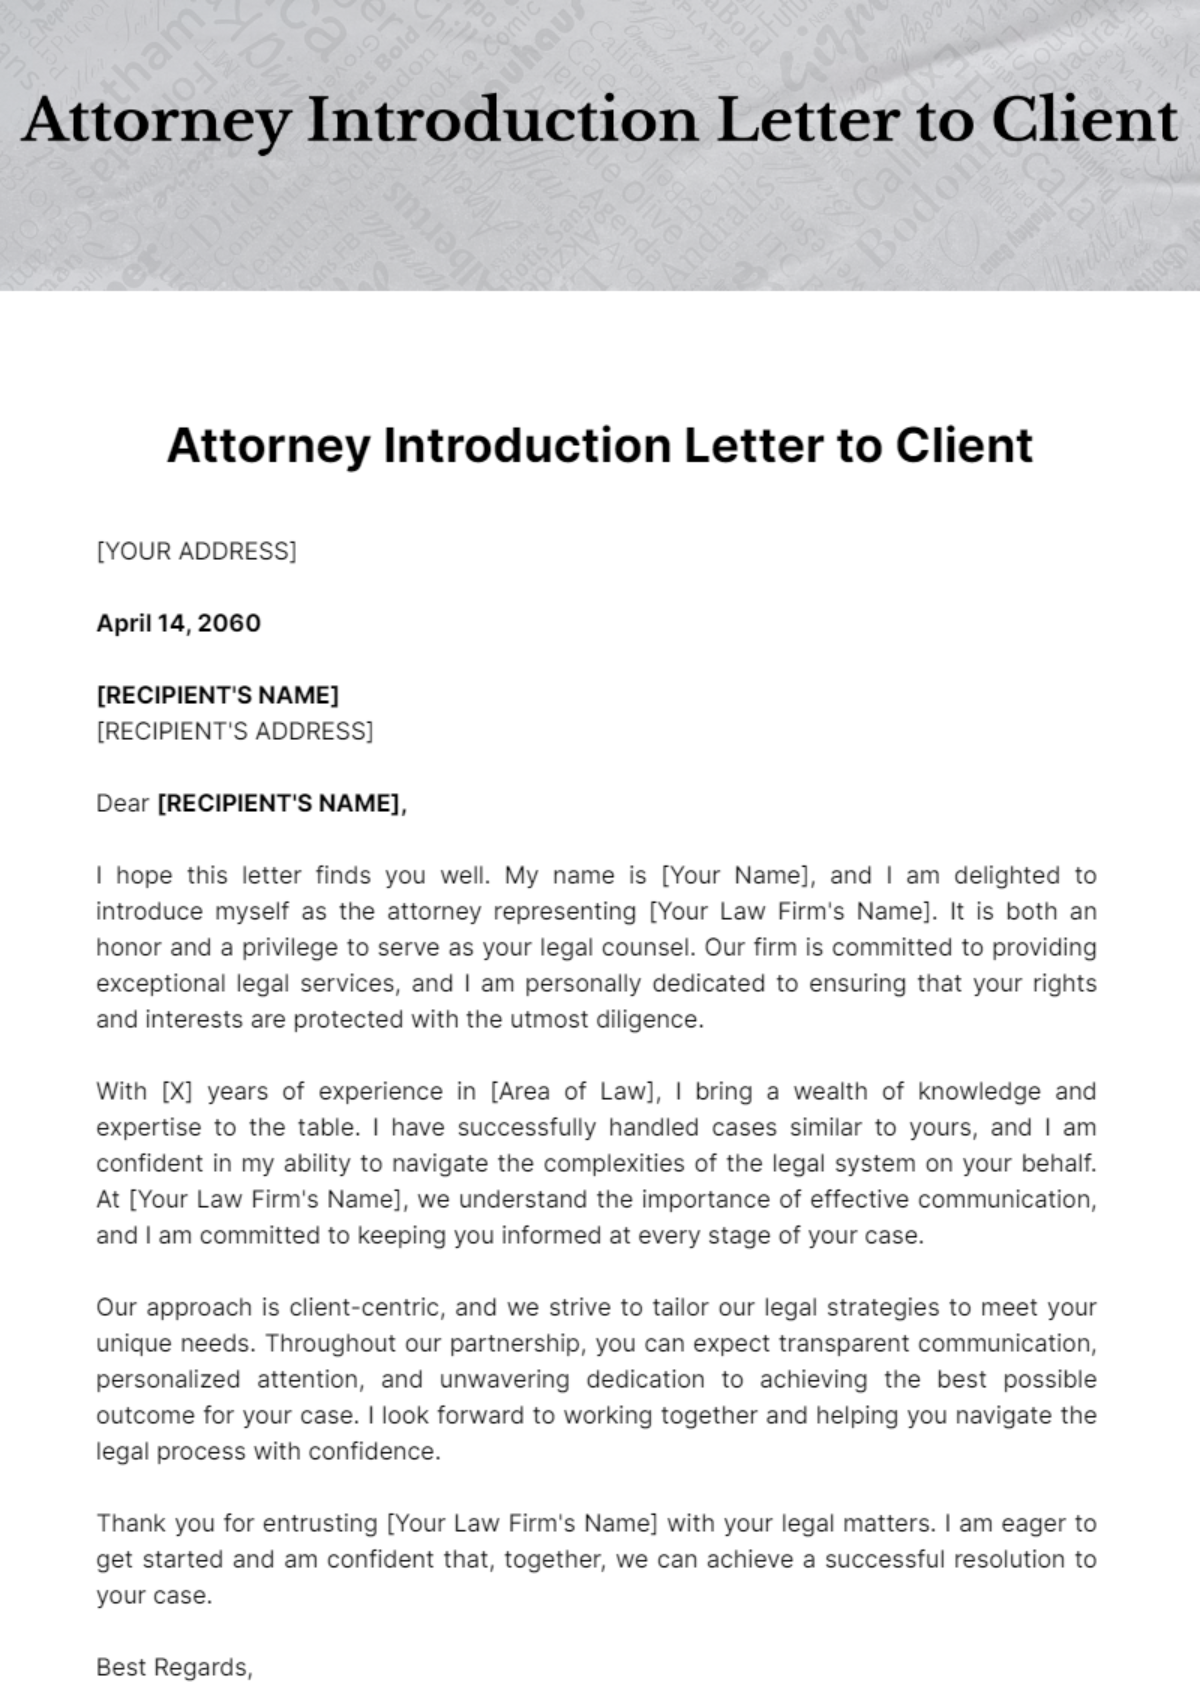 Free Attorney Introduction Letter to Client Template